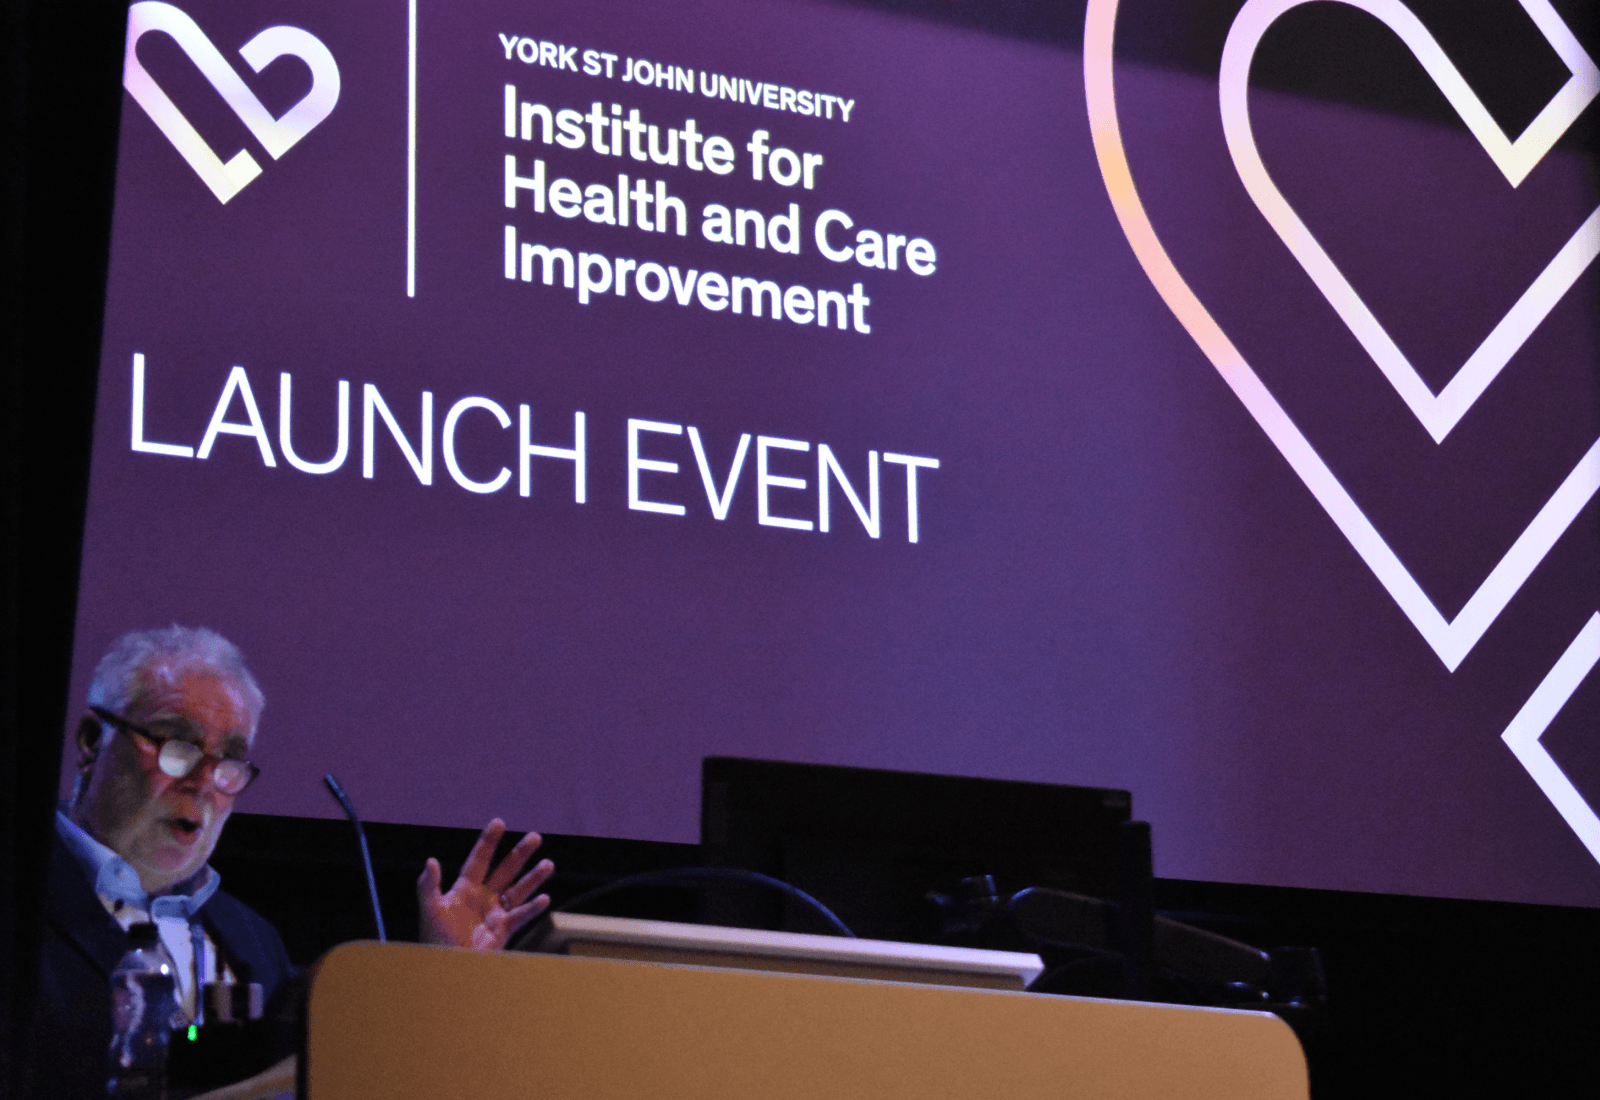 A man speaking at a lecturn in front of a launch event banner 